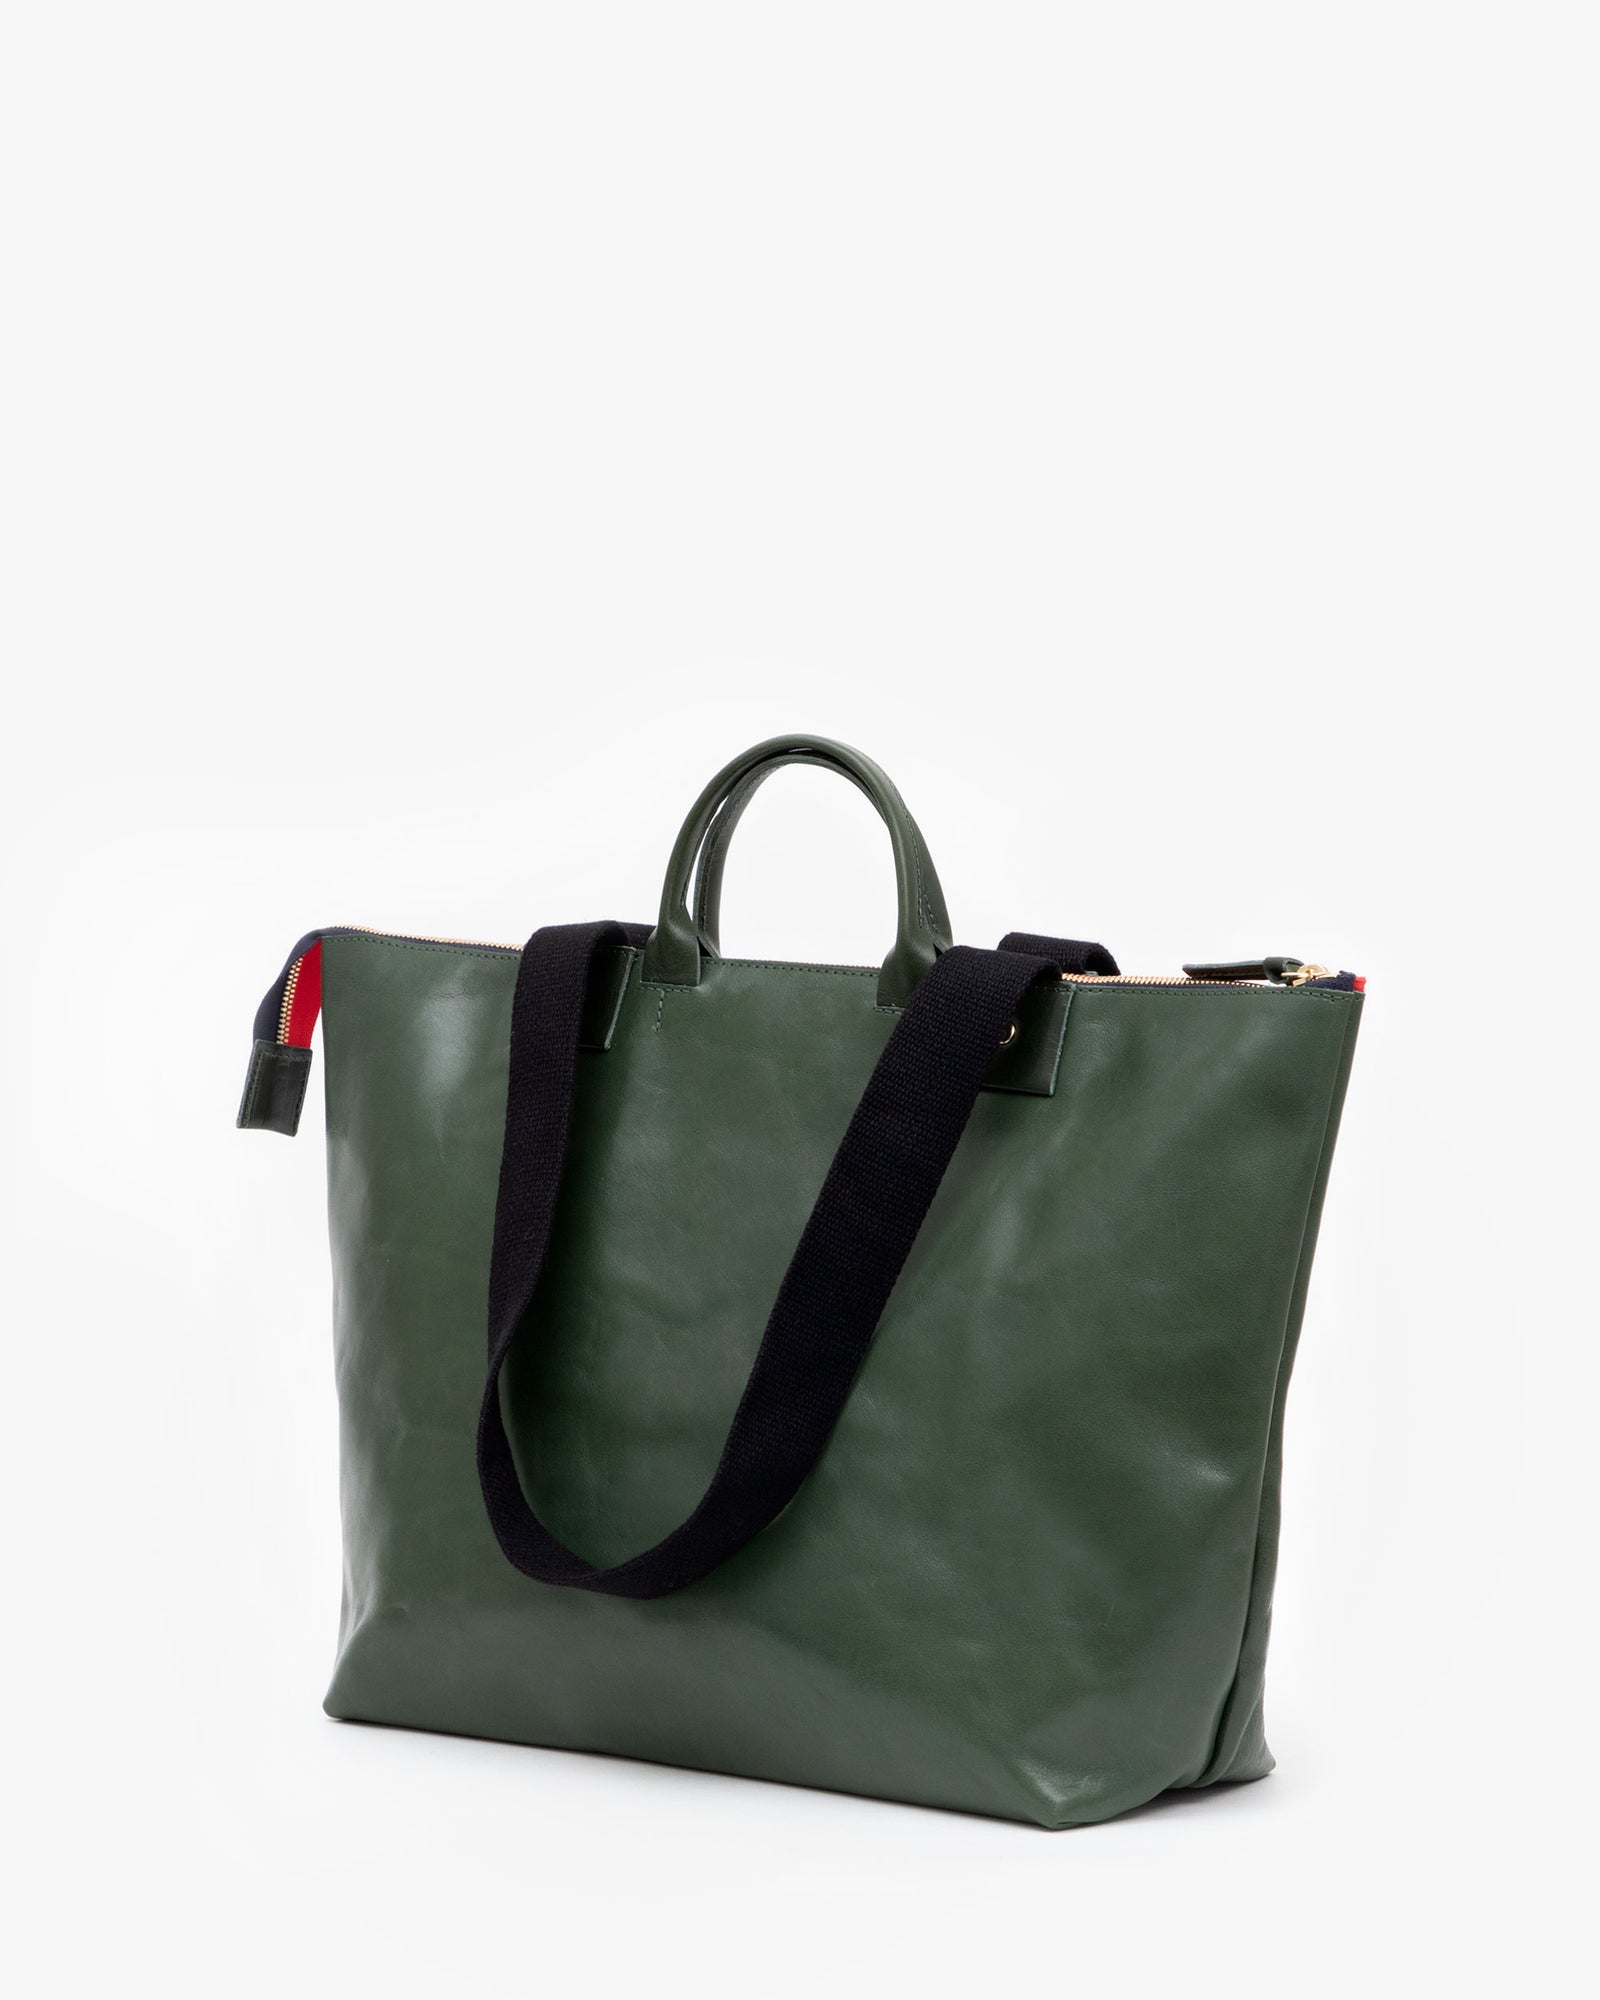 Clare V, Bags, Clare V Le Zip Sac Loden Green Color No Longer Avail